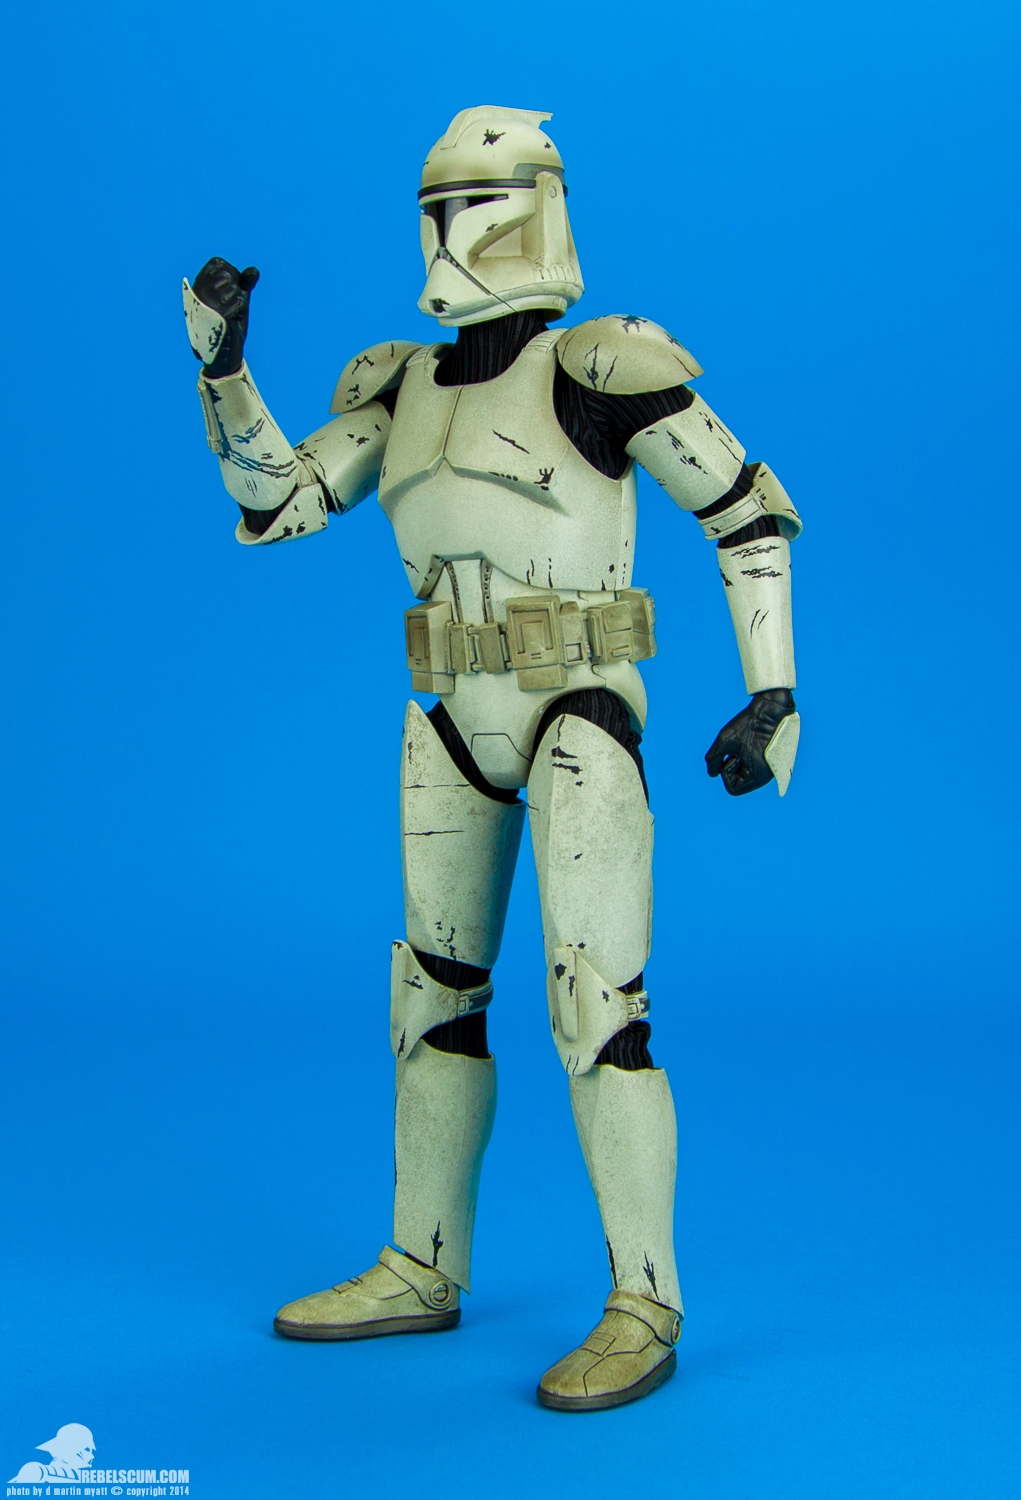 Clone-Trooper-Deluxe-Veteran-Sixth-Scale-Figure-Sideshow-Collectibles-003.jpg